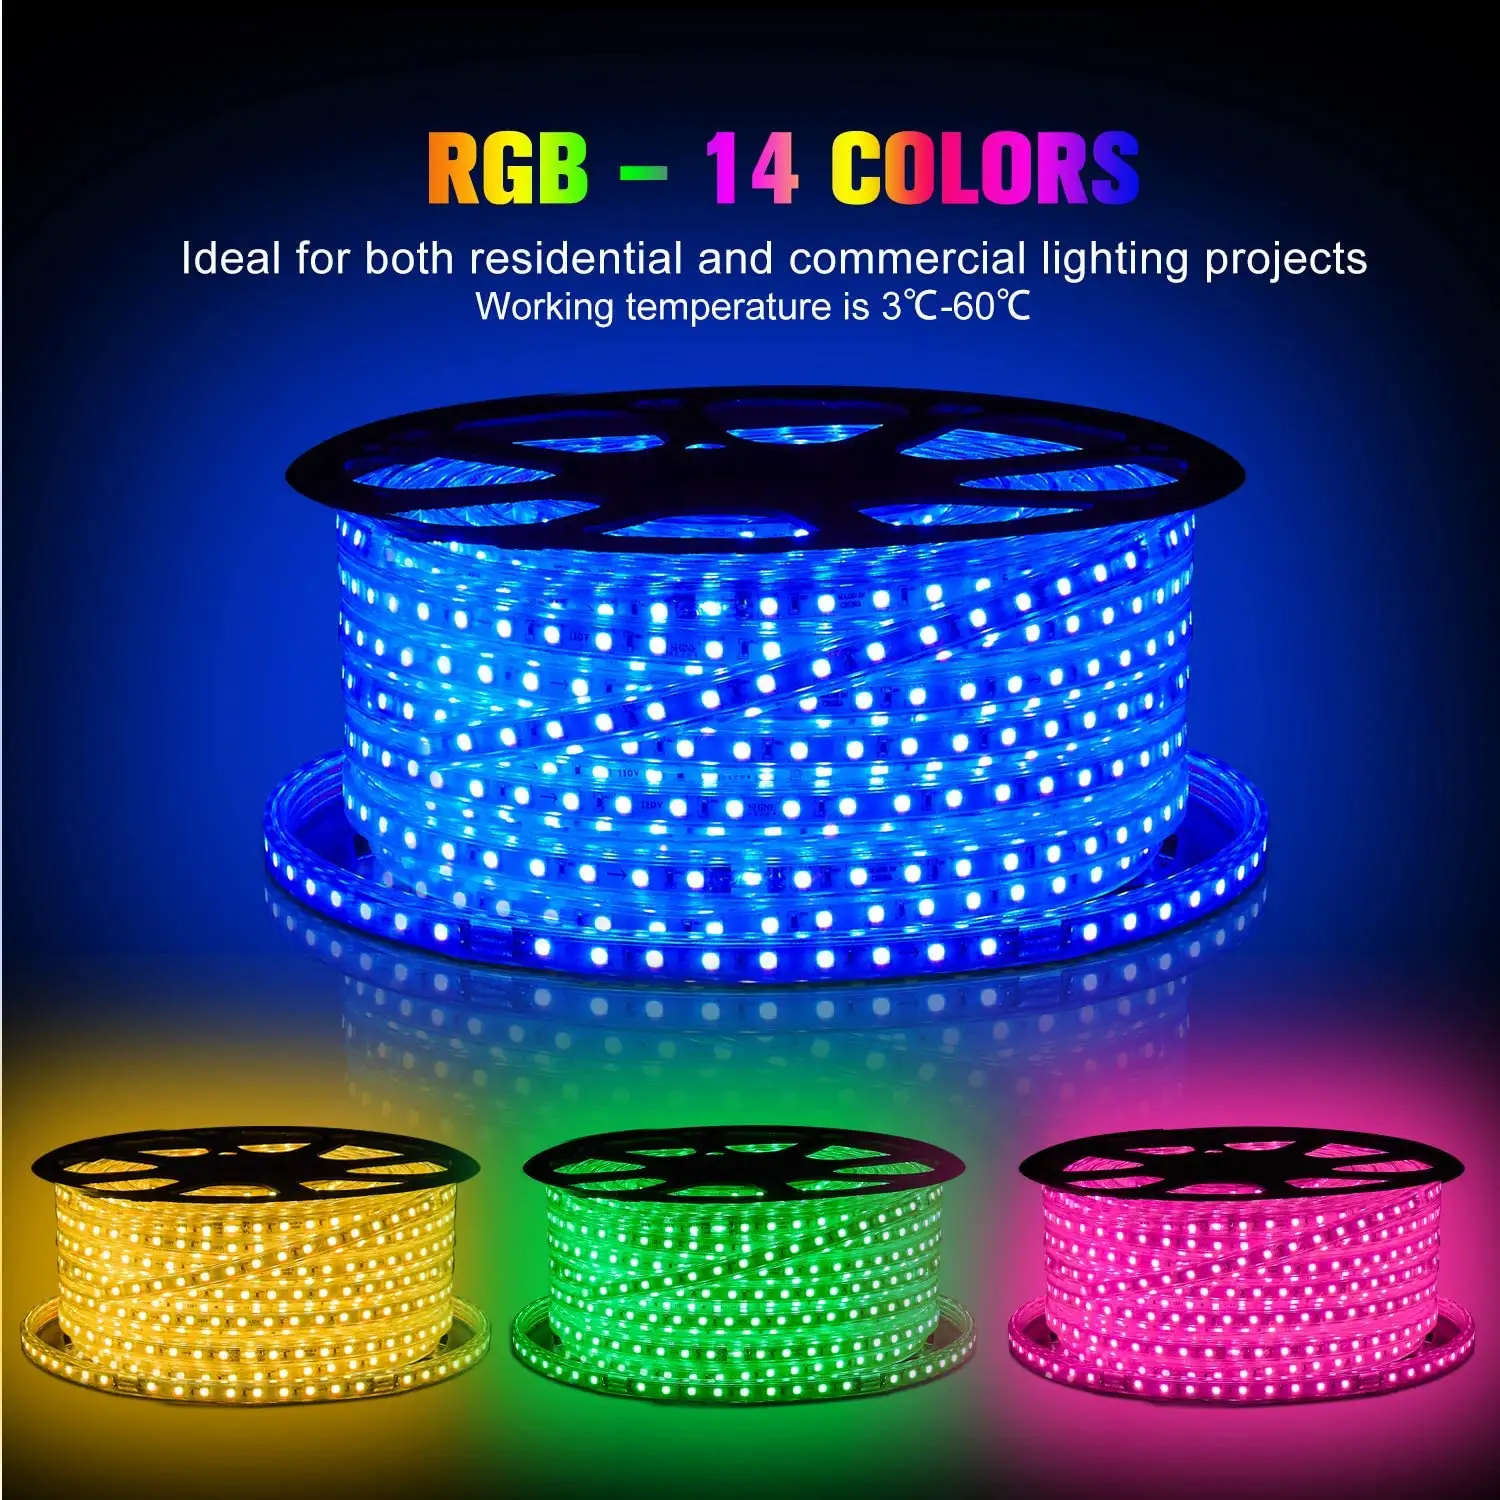 LED RGB Light Strip ETL Listed IP65 Waterproof Dimmable Remote LED RGB Strip Lights for Atmosphere Decoration